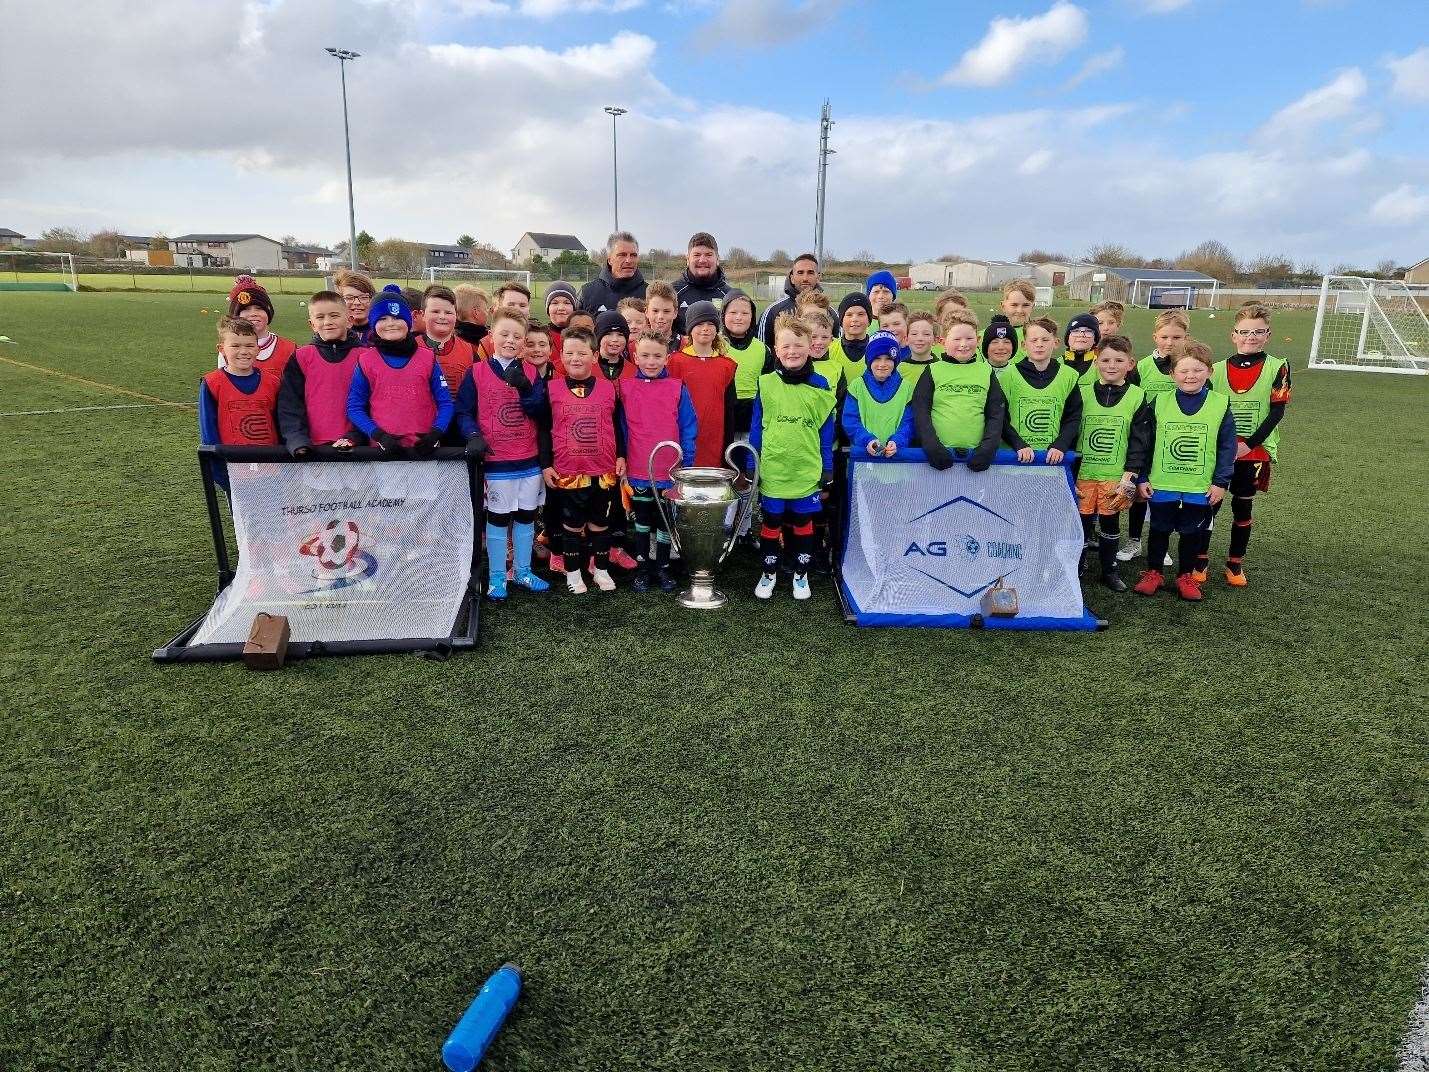 Three age groups of players under went a session with Benfica coaches Joao Rosmaniho and Serguei Kandaurov - pictured is the middle 7-10 bracket at Thurso Football Academy.